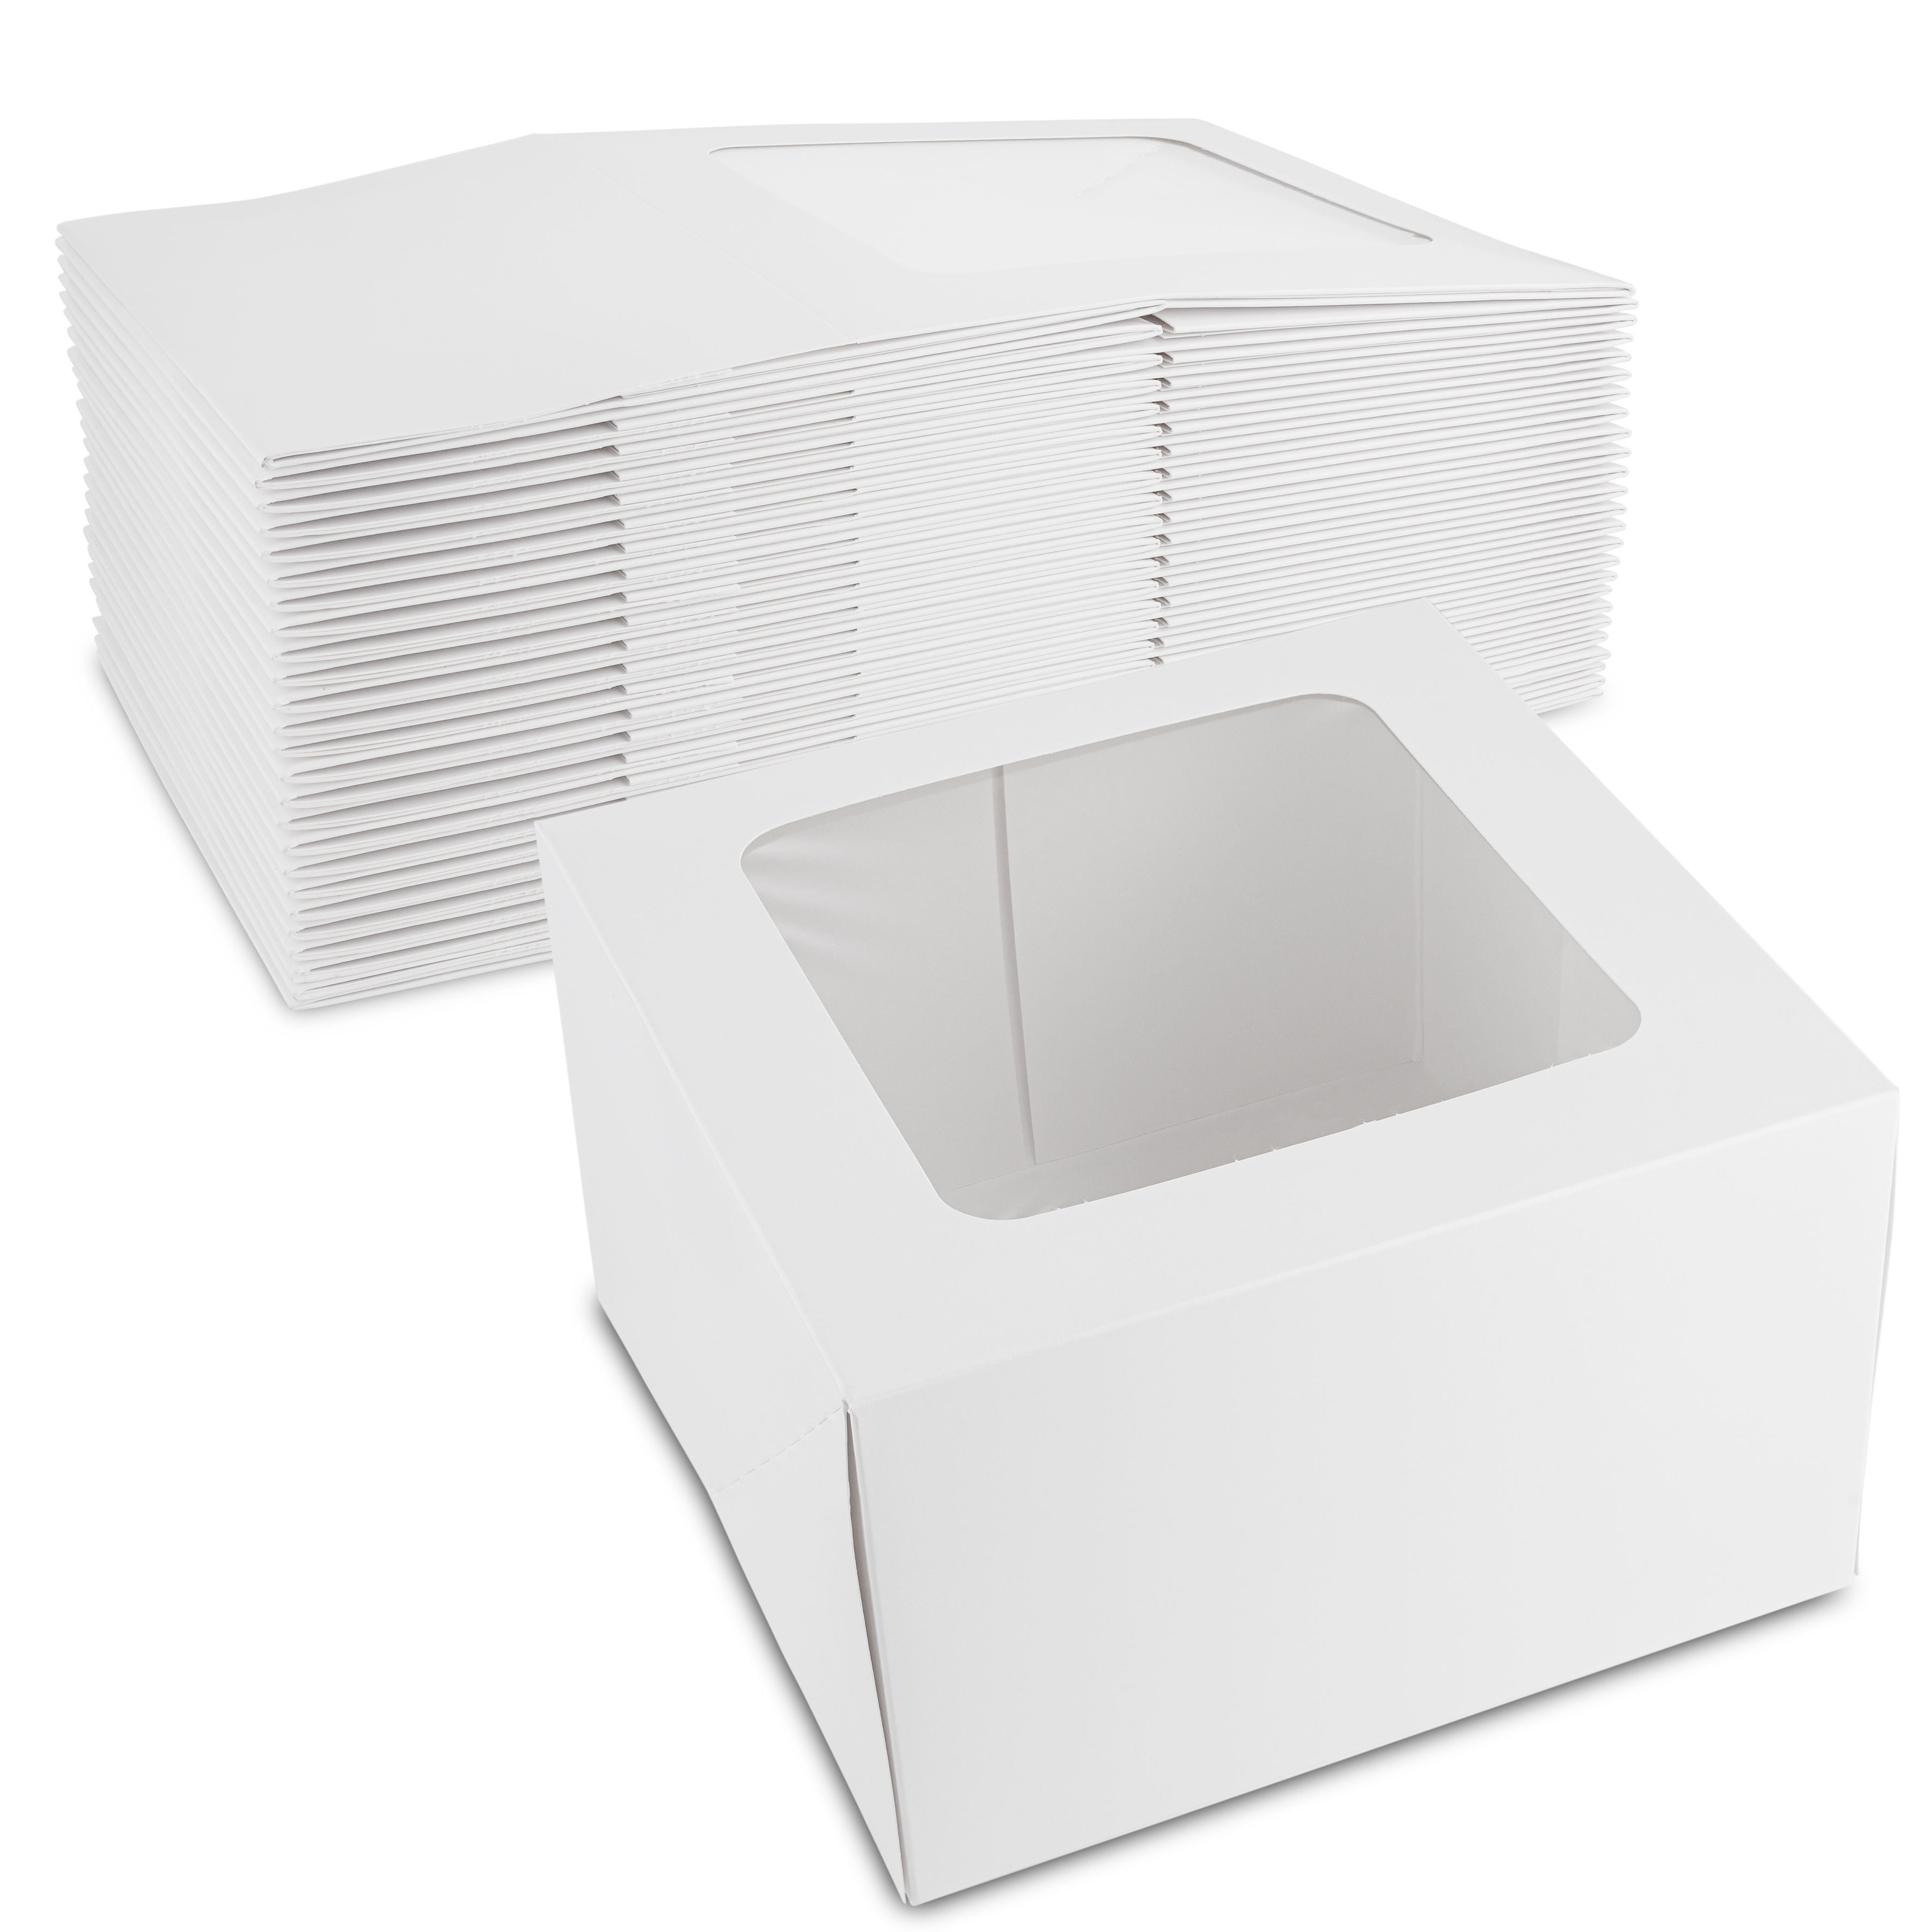 25 Cupcake WINDOW Bakery Box Holds 6 Each with INSERTS 9x7x3.5 WHITE 